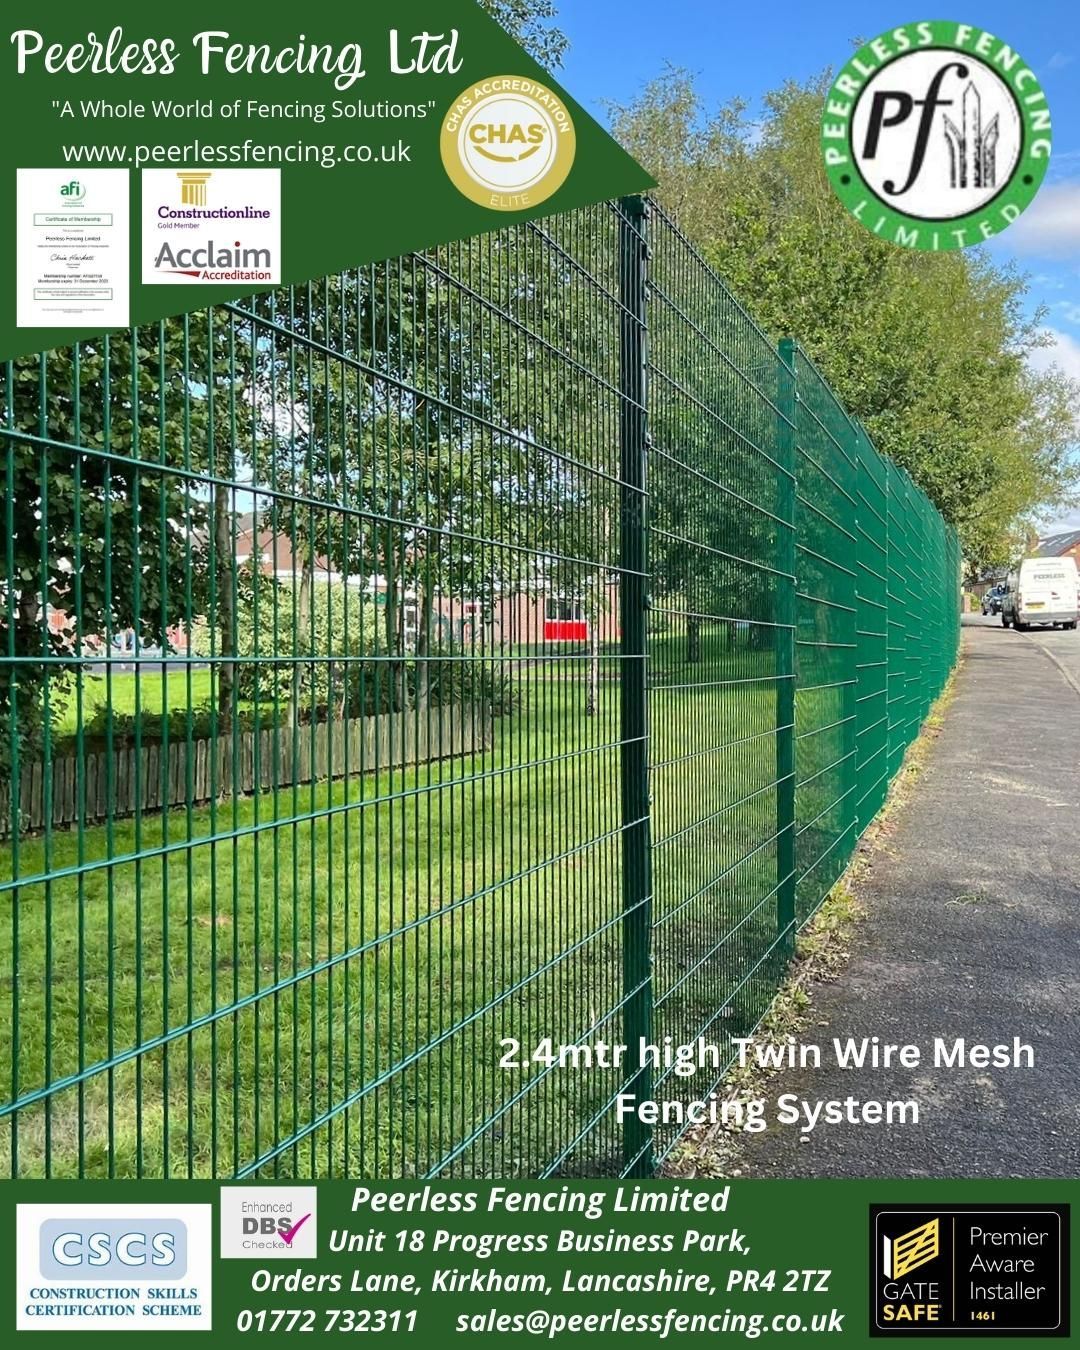 Peerless Fencing Limited – A Whole World of Fencing Solutions